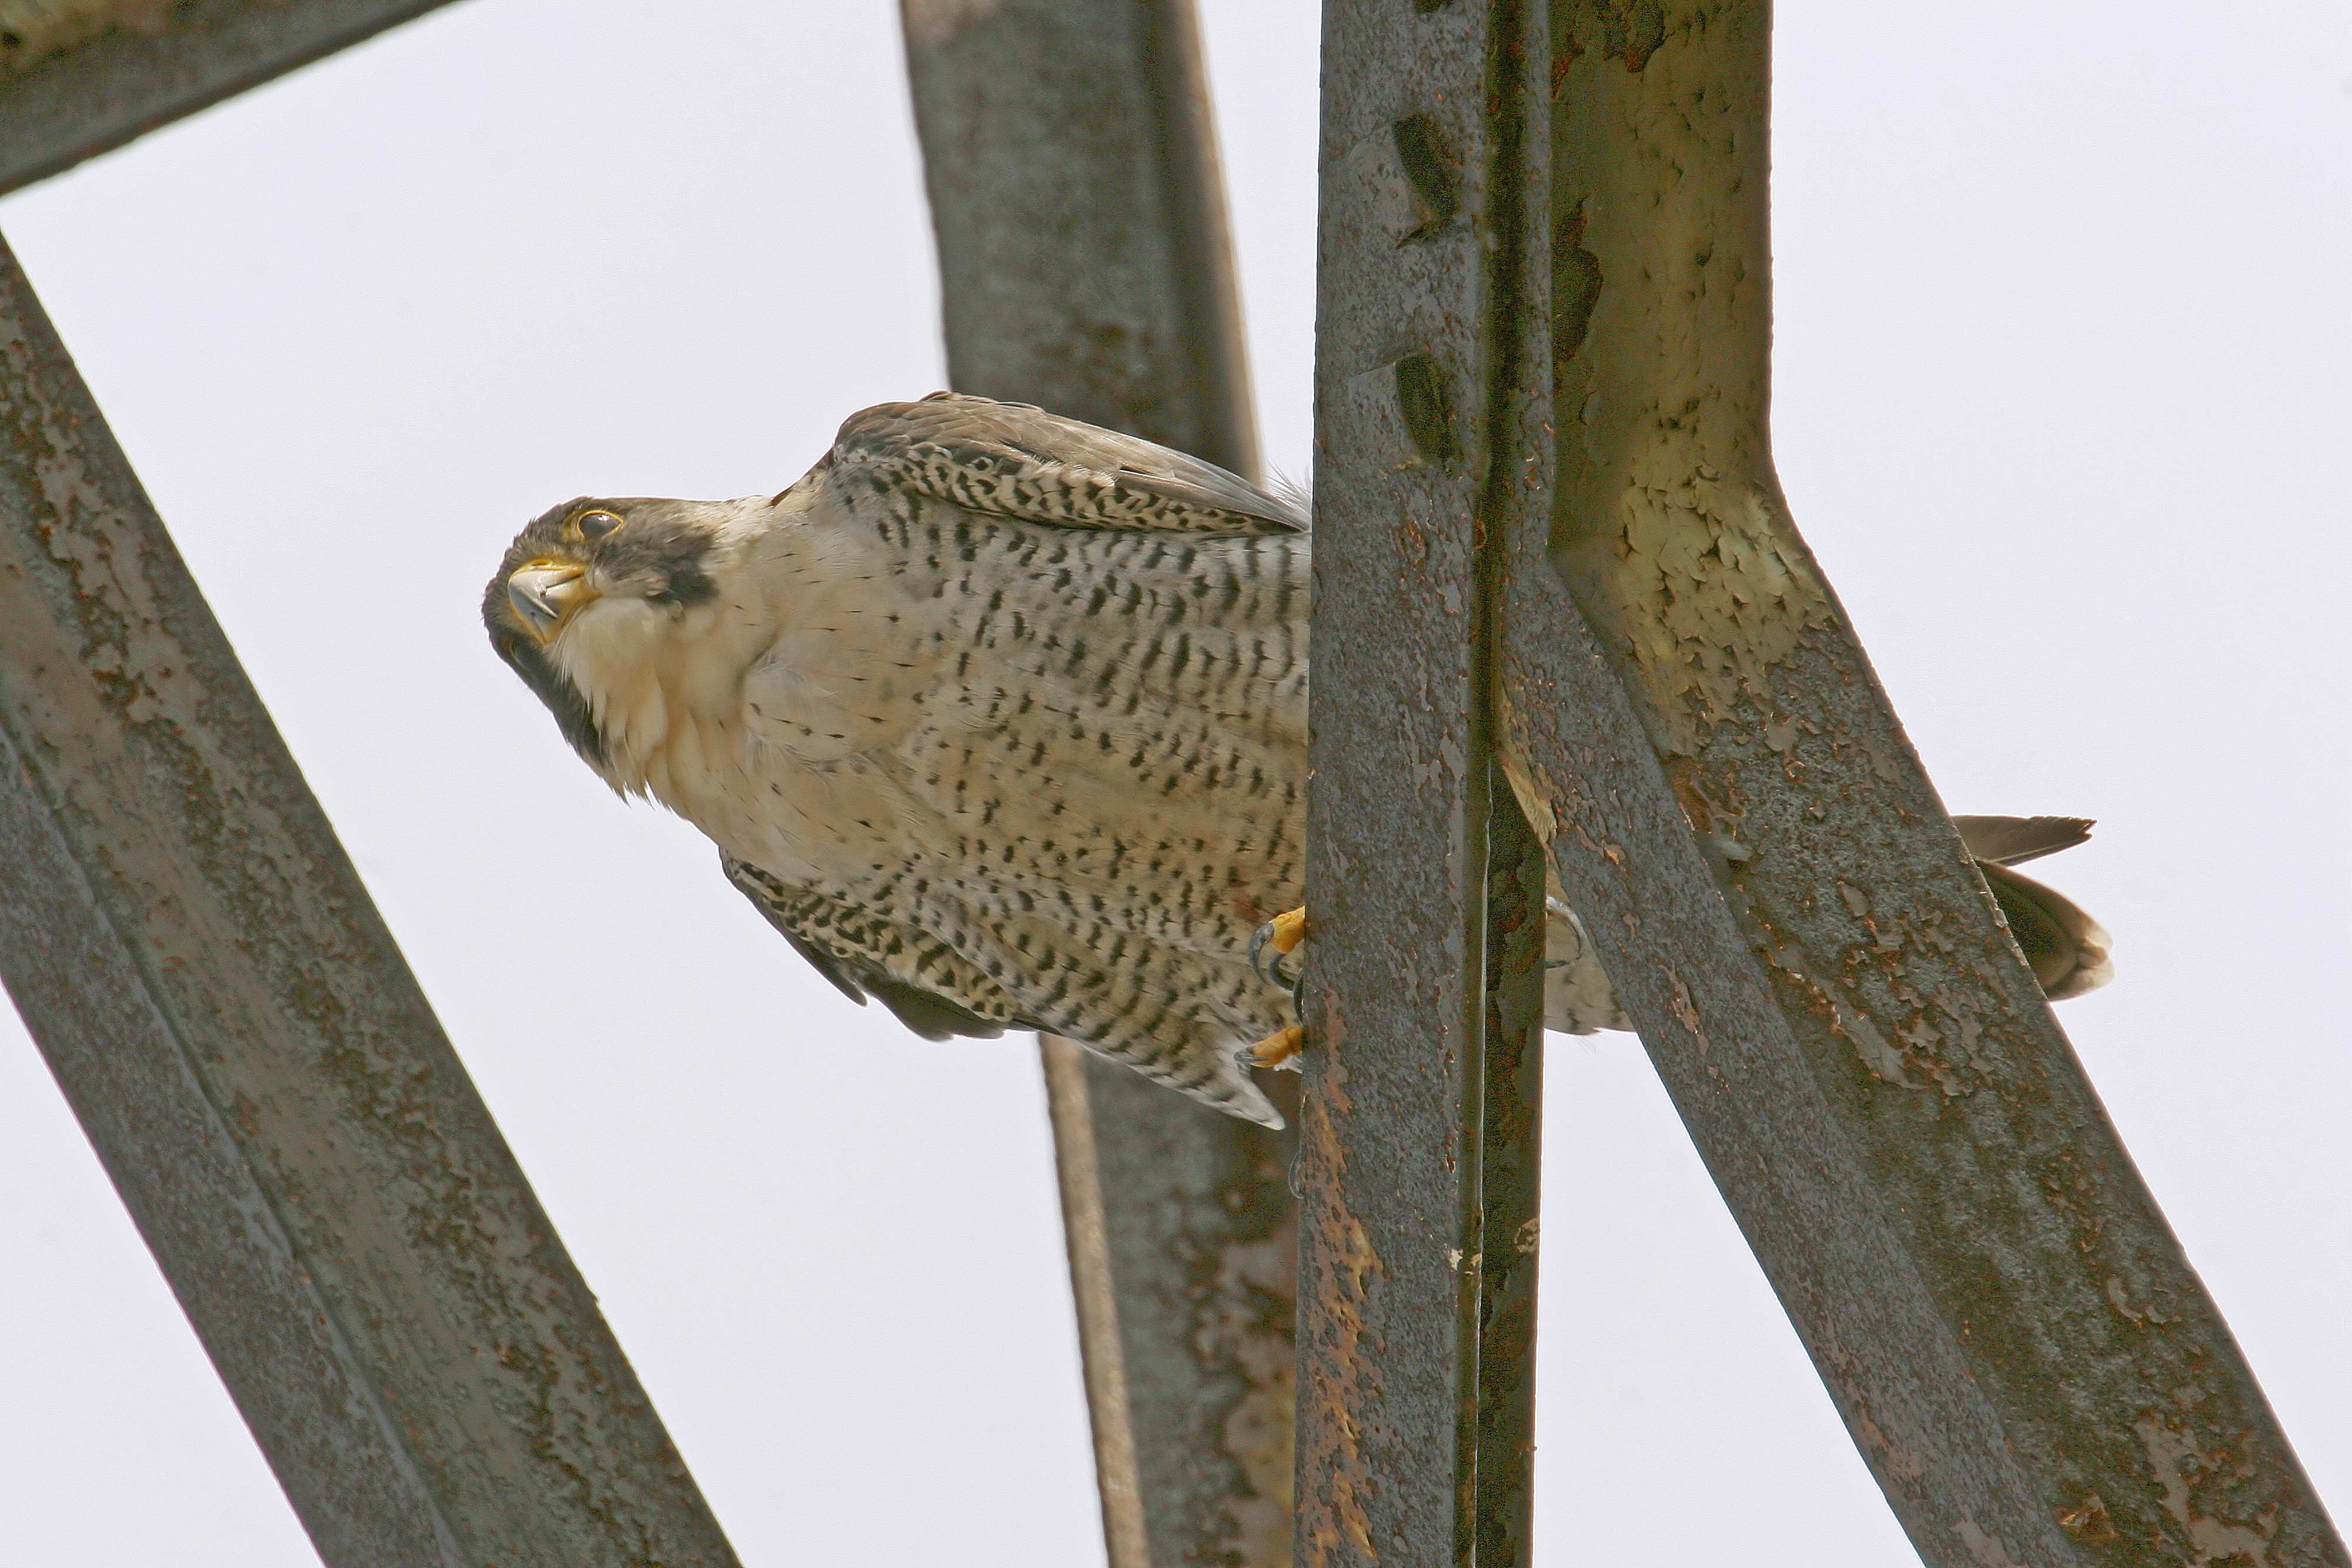 A peregrine falcon on a wooden structure.